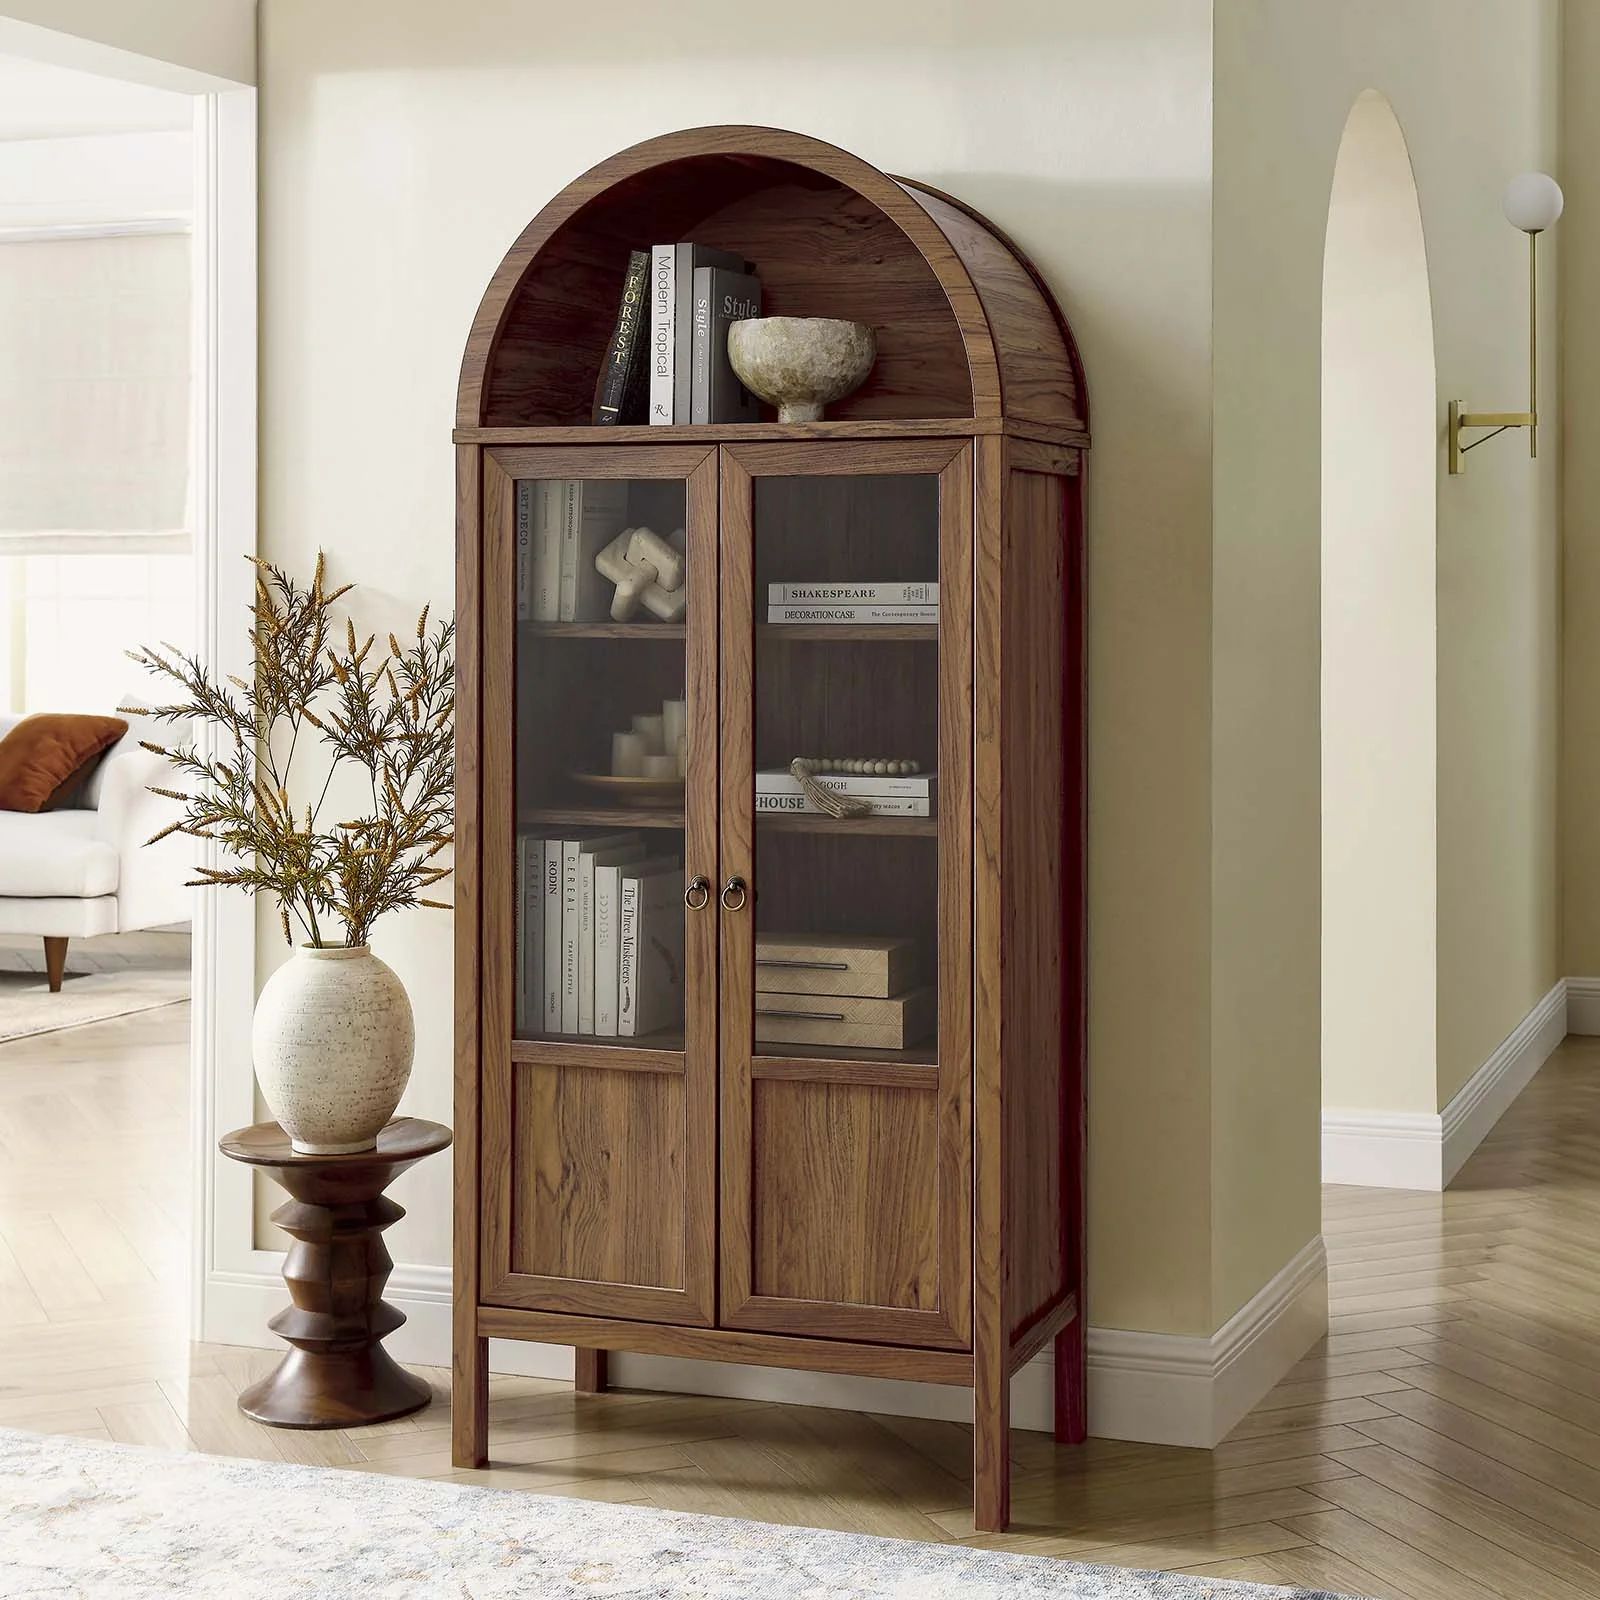 Best seller Modway Modway Tessa Tall Arched Storage Display Cabinet in Walnut (1.0)1 star out of ... | Walmart (US)